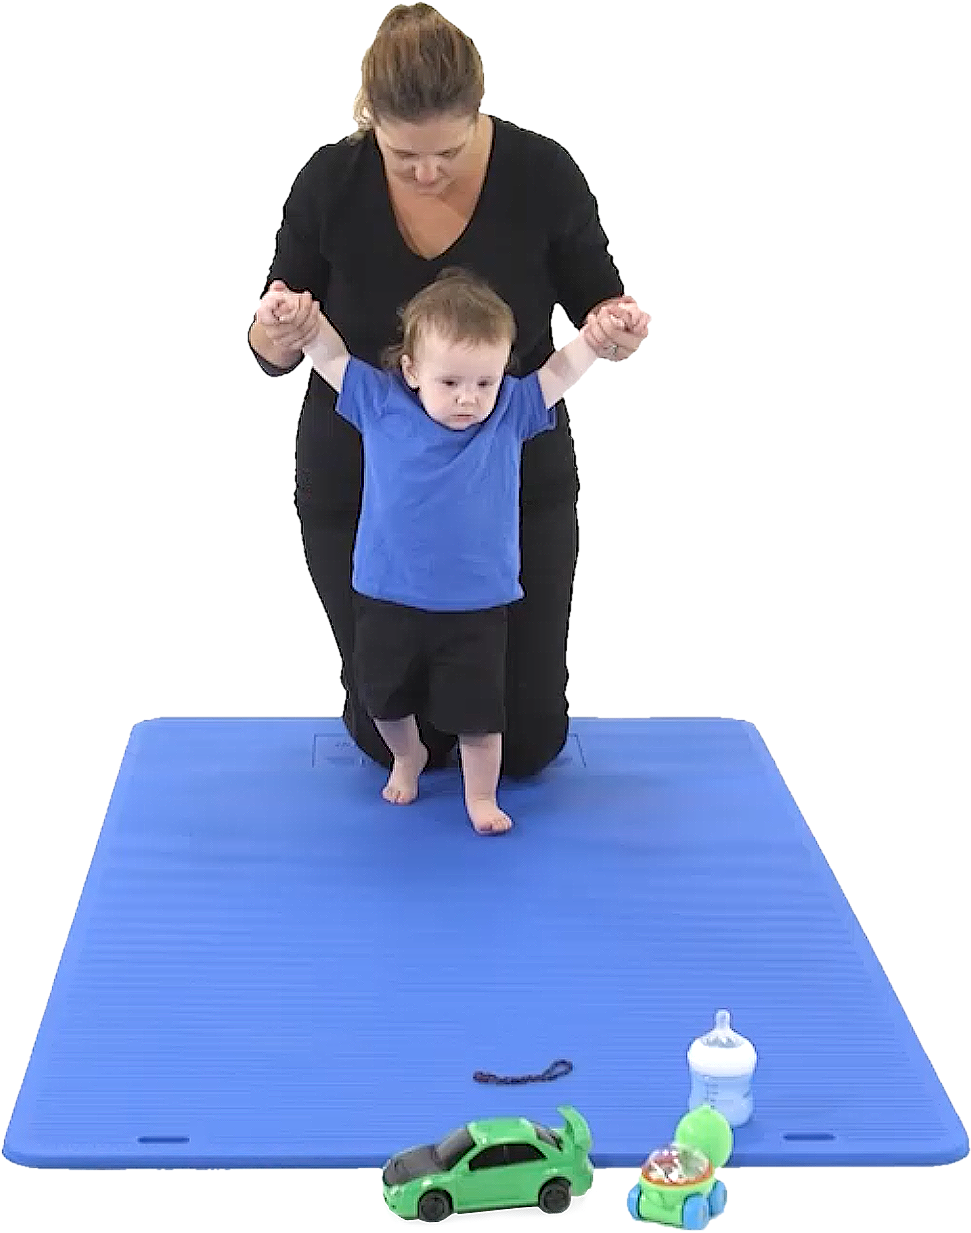 Pediatric Physical Therapy - Exercise Mat - (1107x1371) Png Clipart Downloa...